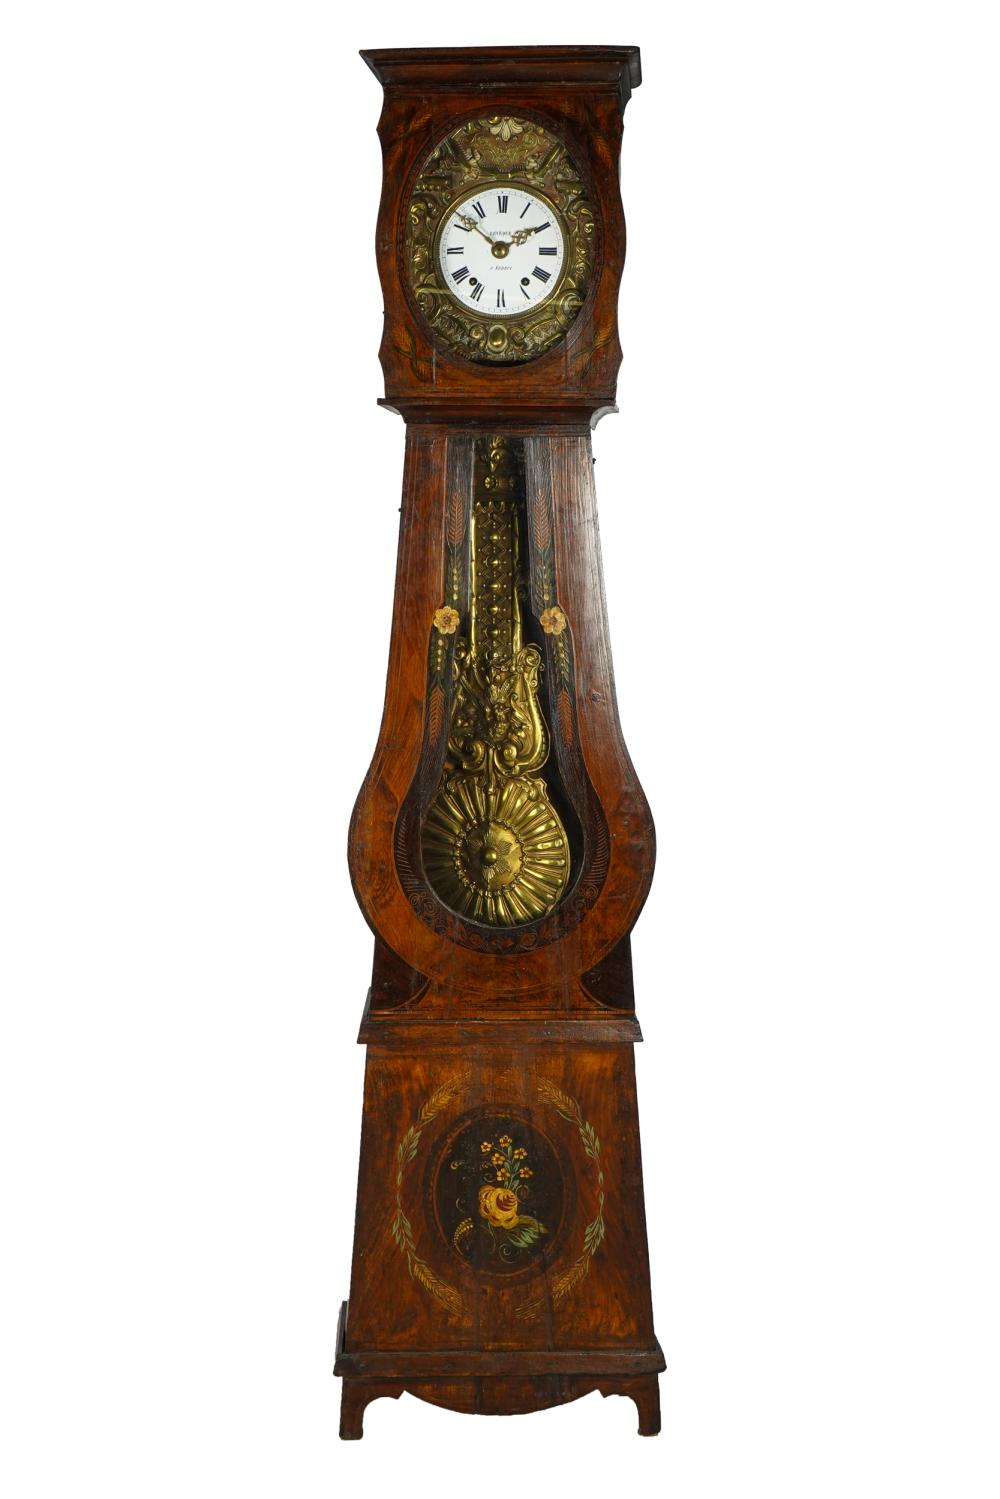 FRENCH MOBILIER GRANDFATHER S CLOCKsigned 33247b